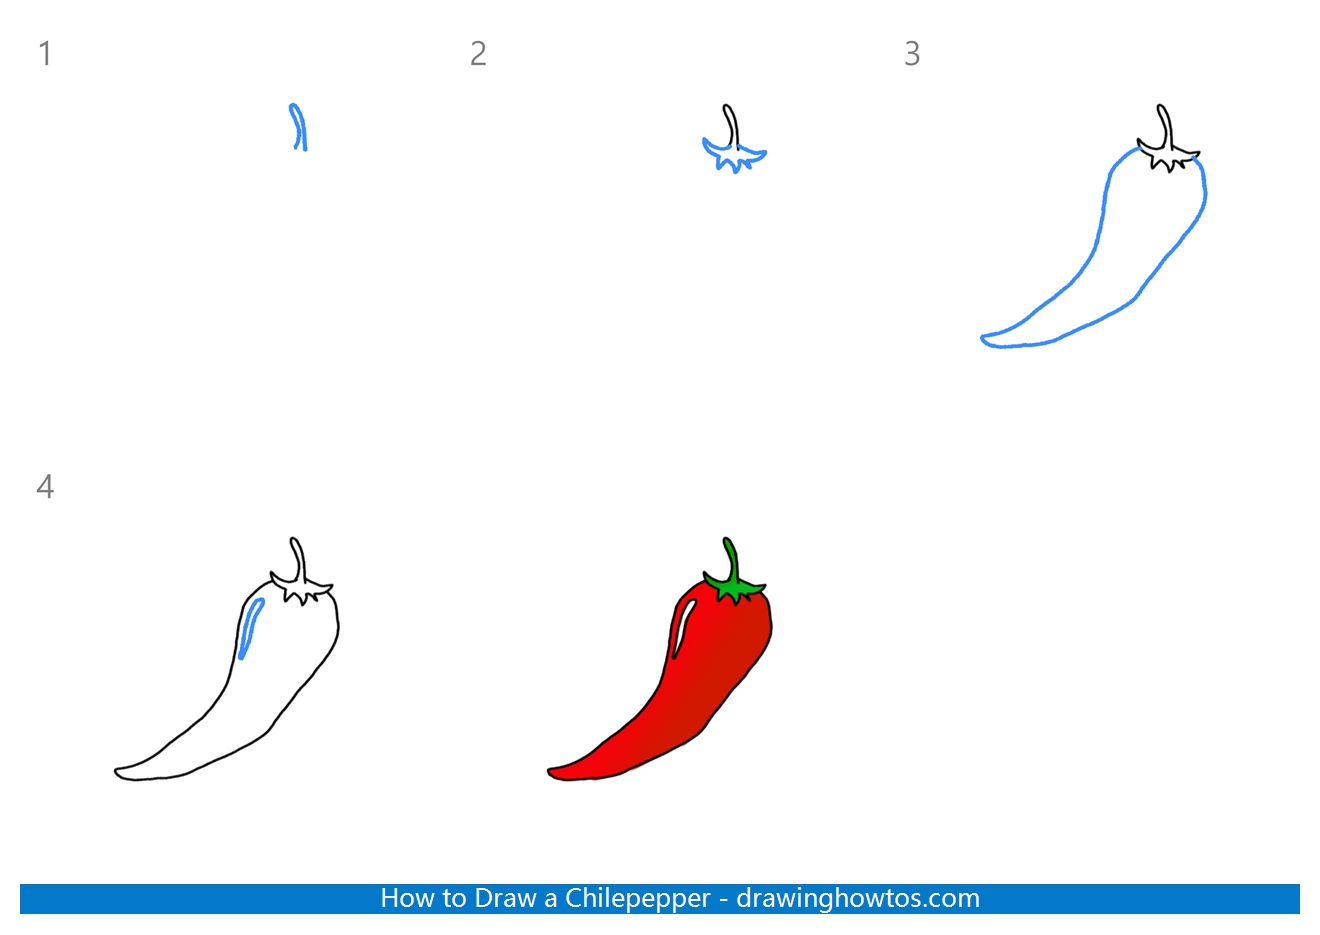 How to Draw a Chili Pepper Step by Step